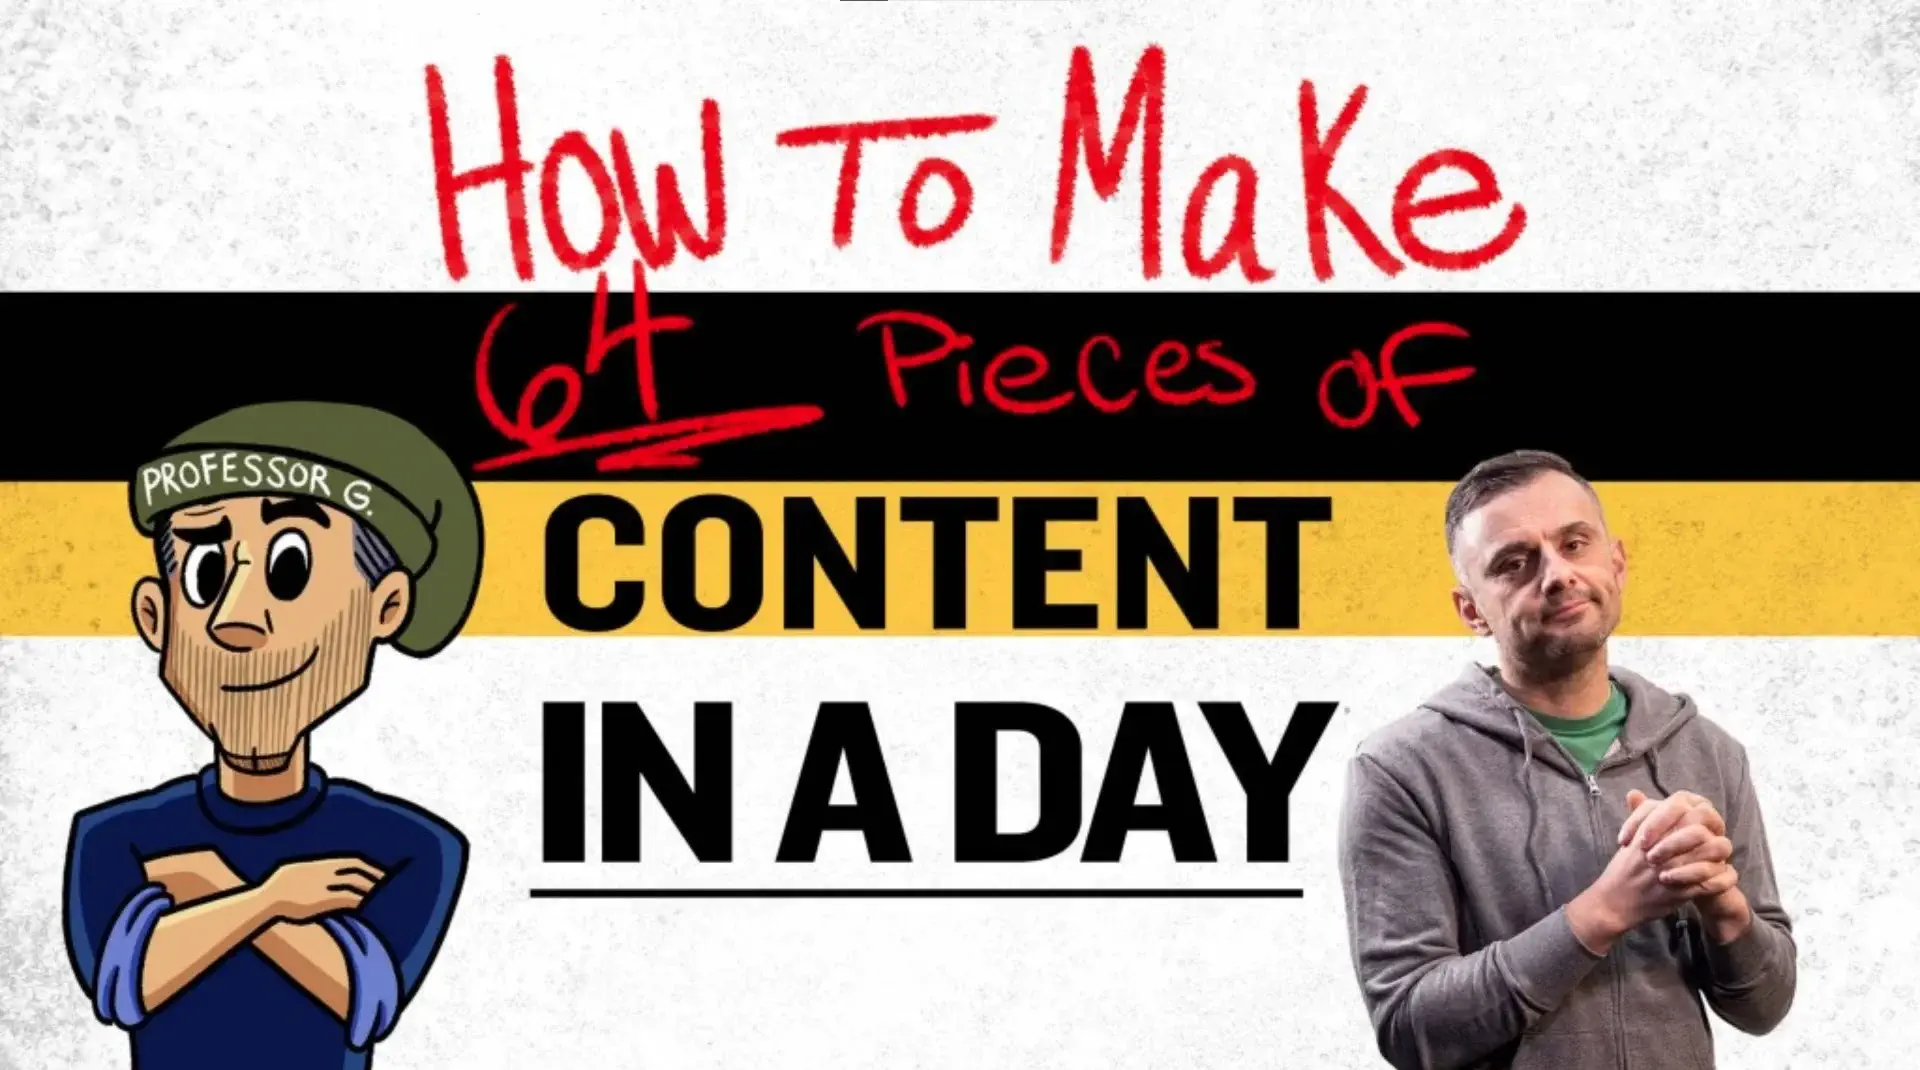 How to Make 64 Pieces of Content in A day Gary Vee